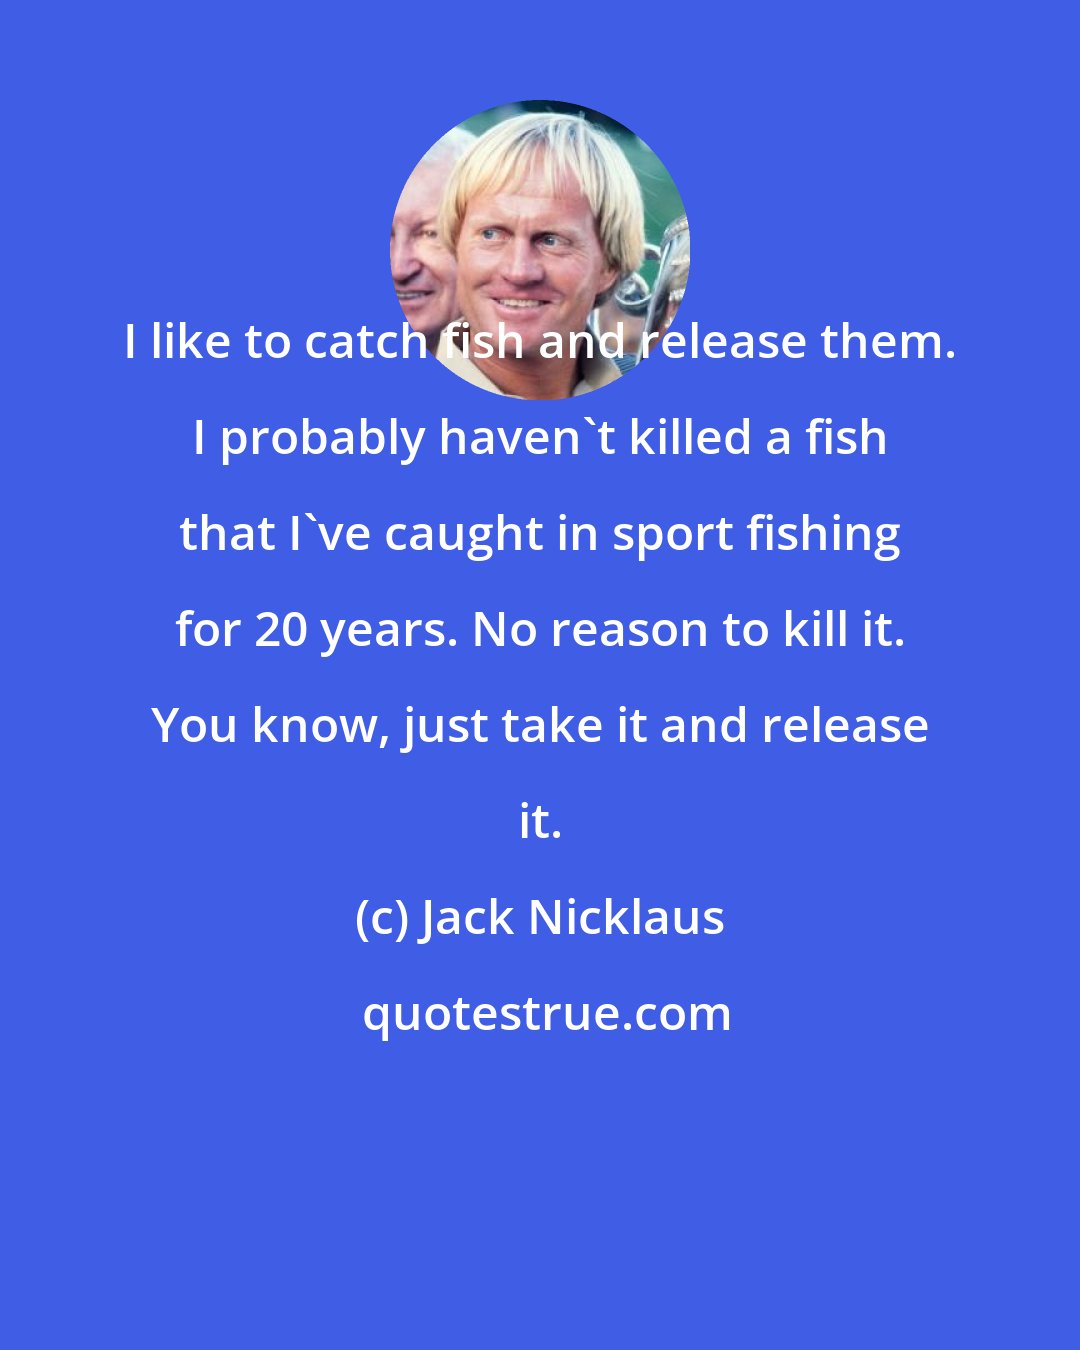 Jack Nicklaus: I like to catch fish and release them. I probably haven't killed a fish that I've caught in sport fishing for 20 years. No reason to kill it. You know, just take it and release it.